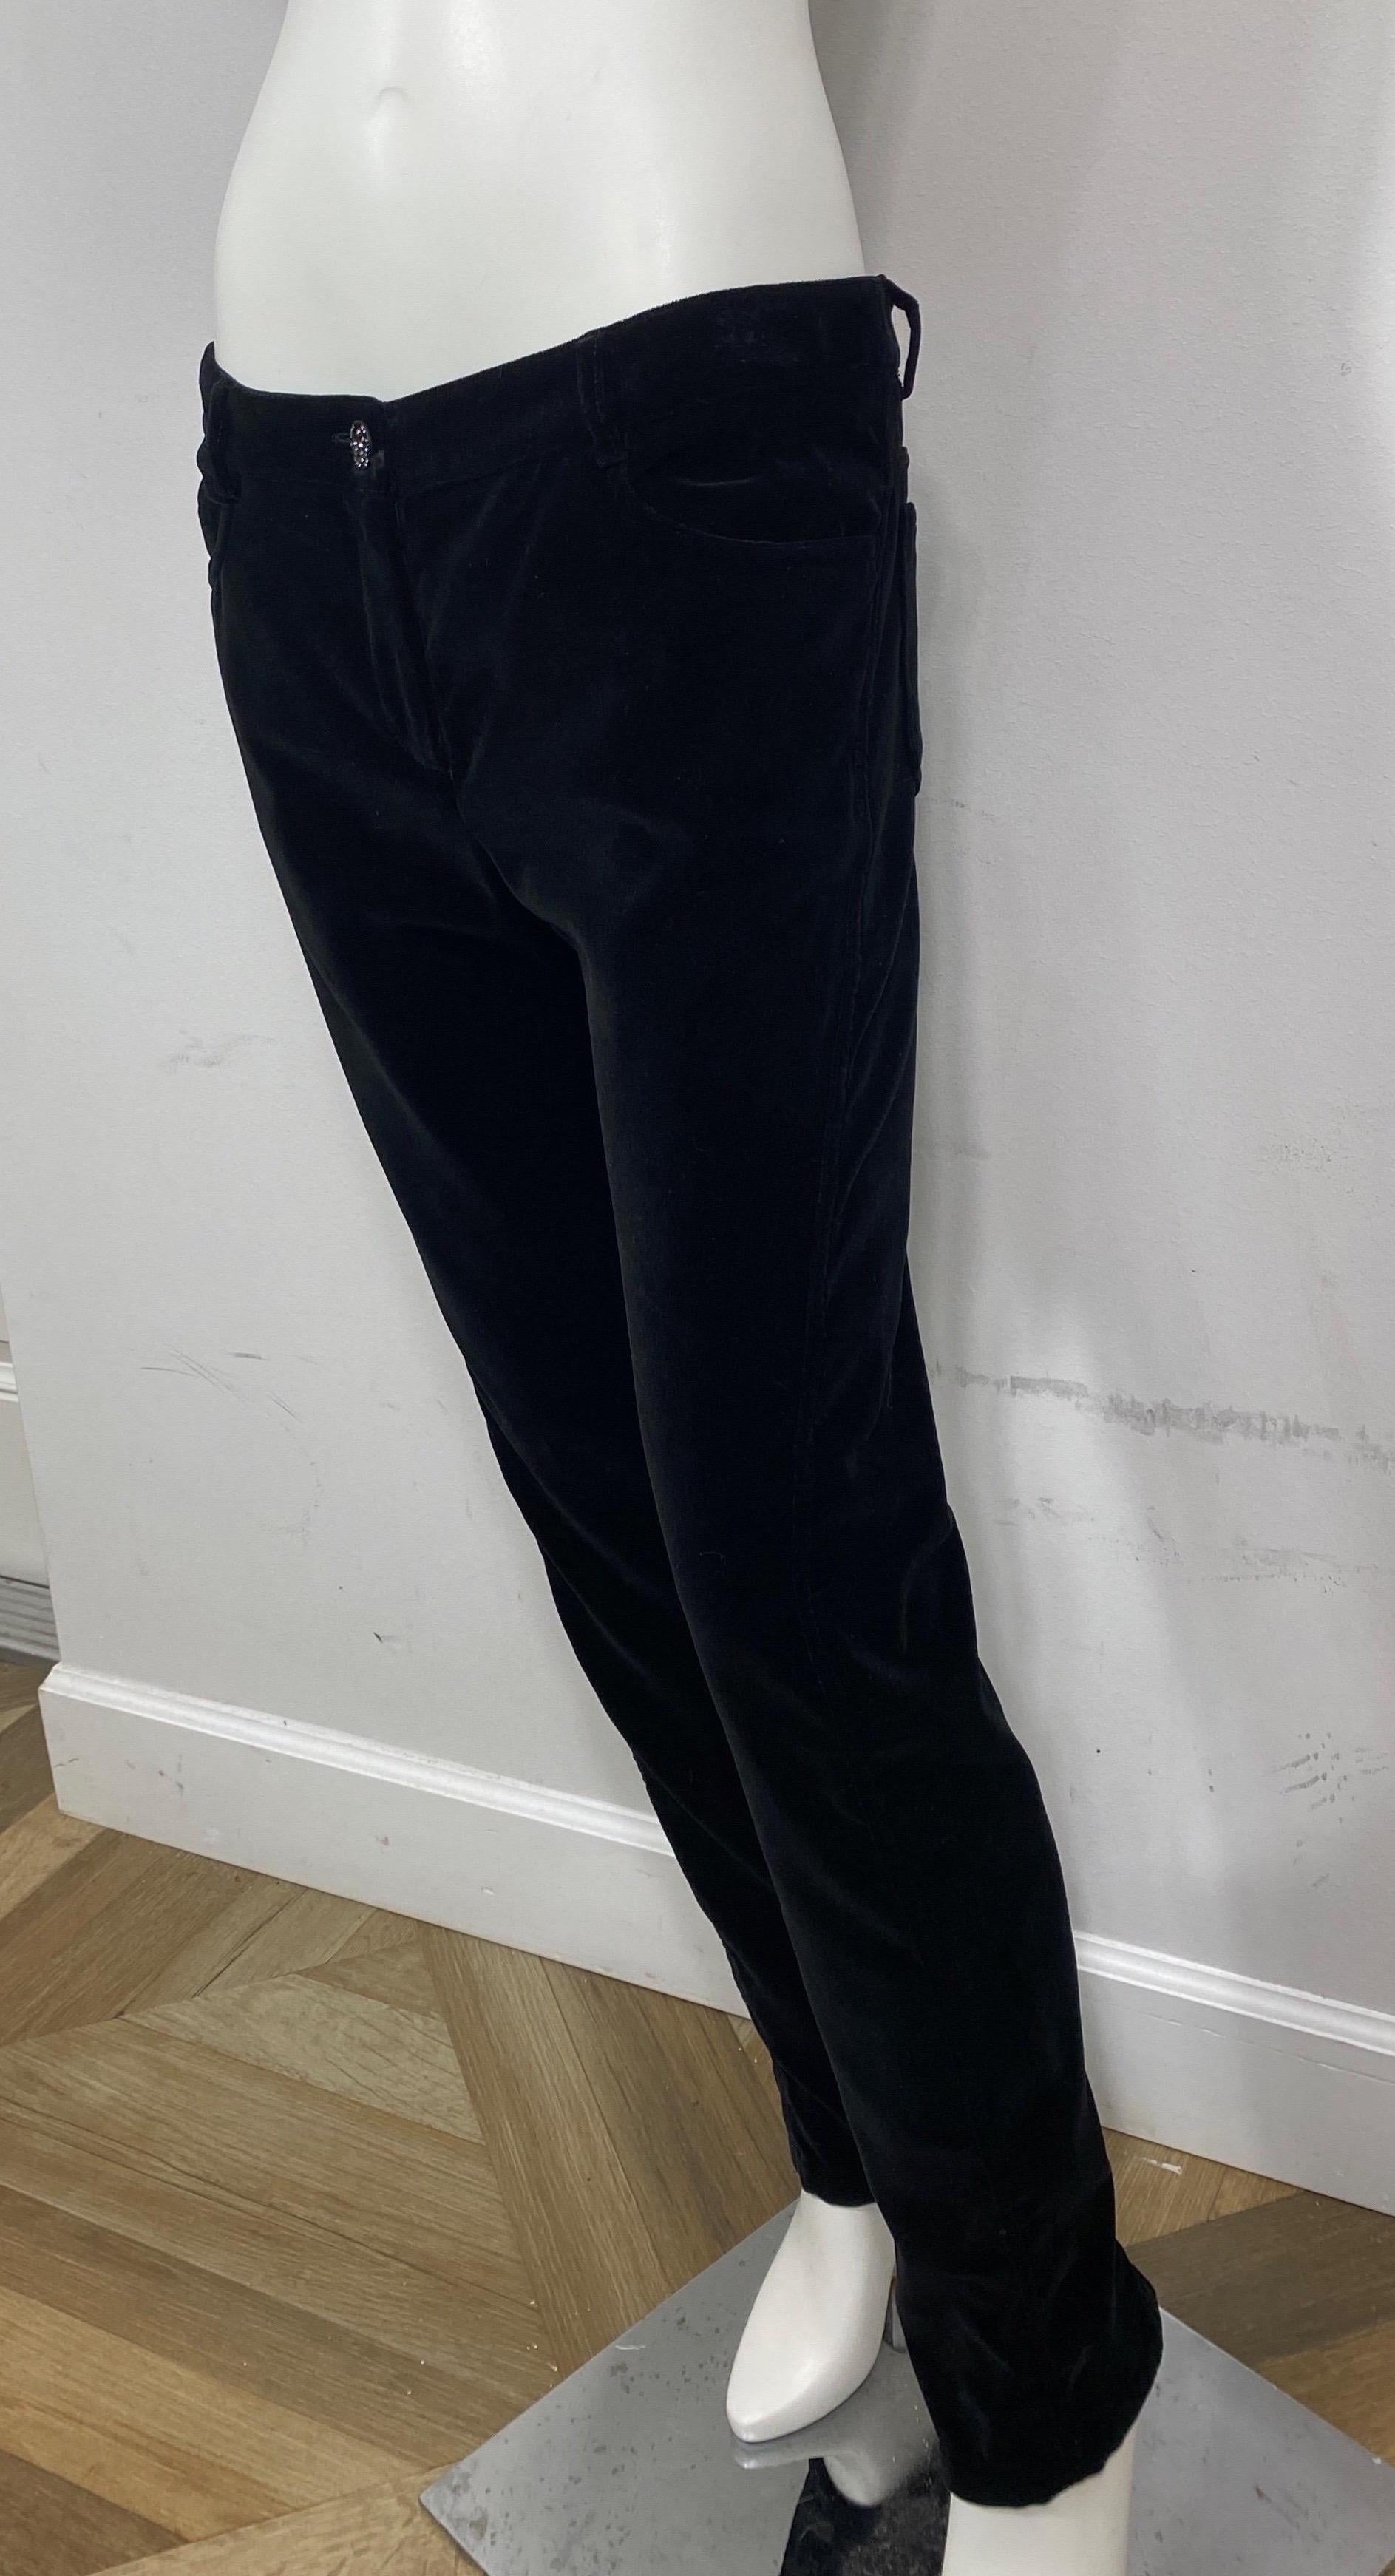 Chanel 2005A Black Cotton Velvet Slim Pant-Size 40 NWT. These soft cotton velvet black jean cut slim pant are new with tags. From the 2005 Autumn collection designed by Karl Lagerfeld the pants have all the pockets that jeans would have (2 back, 2